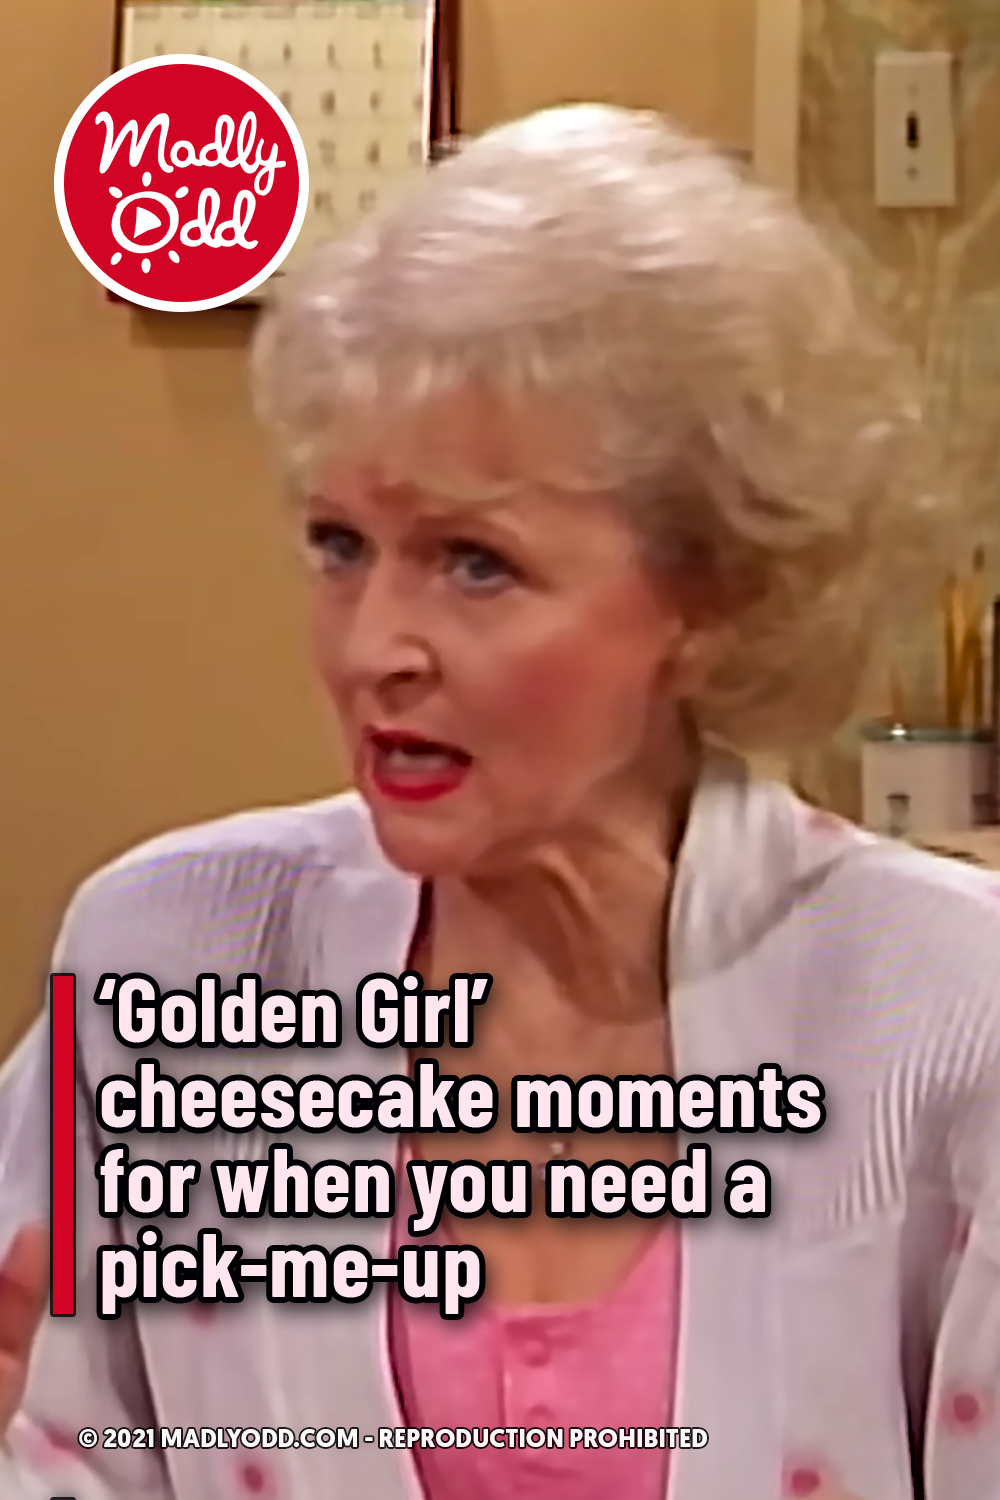 ‘Golden Girl’ cheesecake moments for when you need a pick-me-up